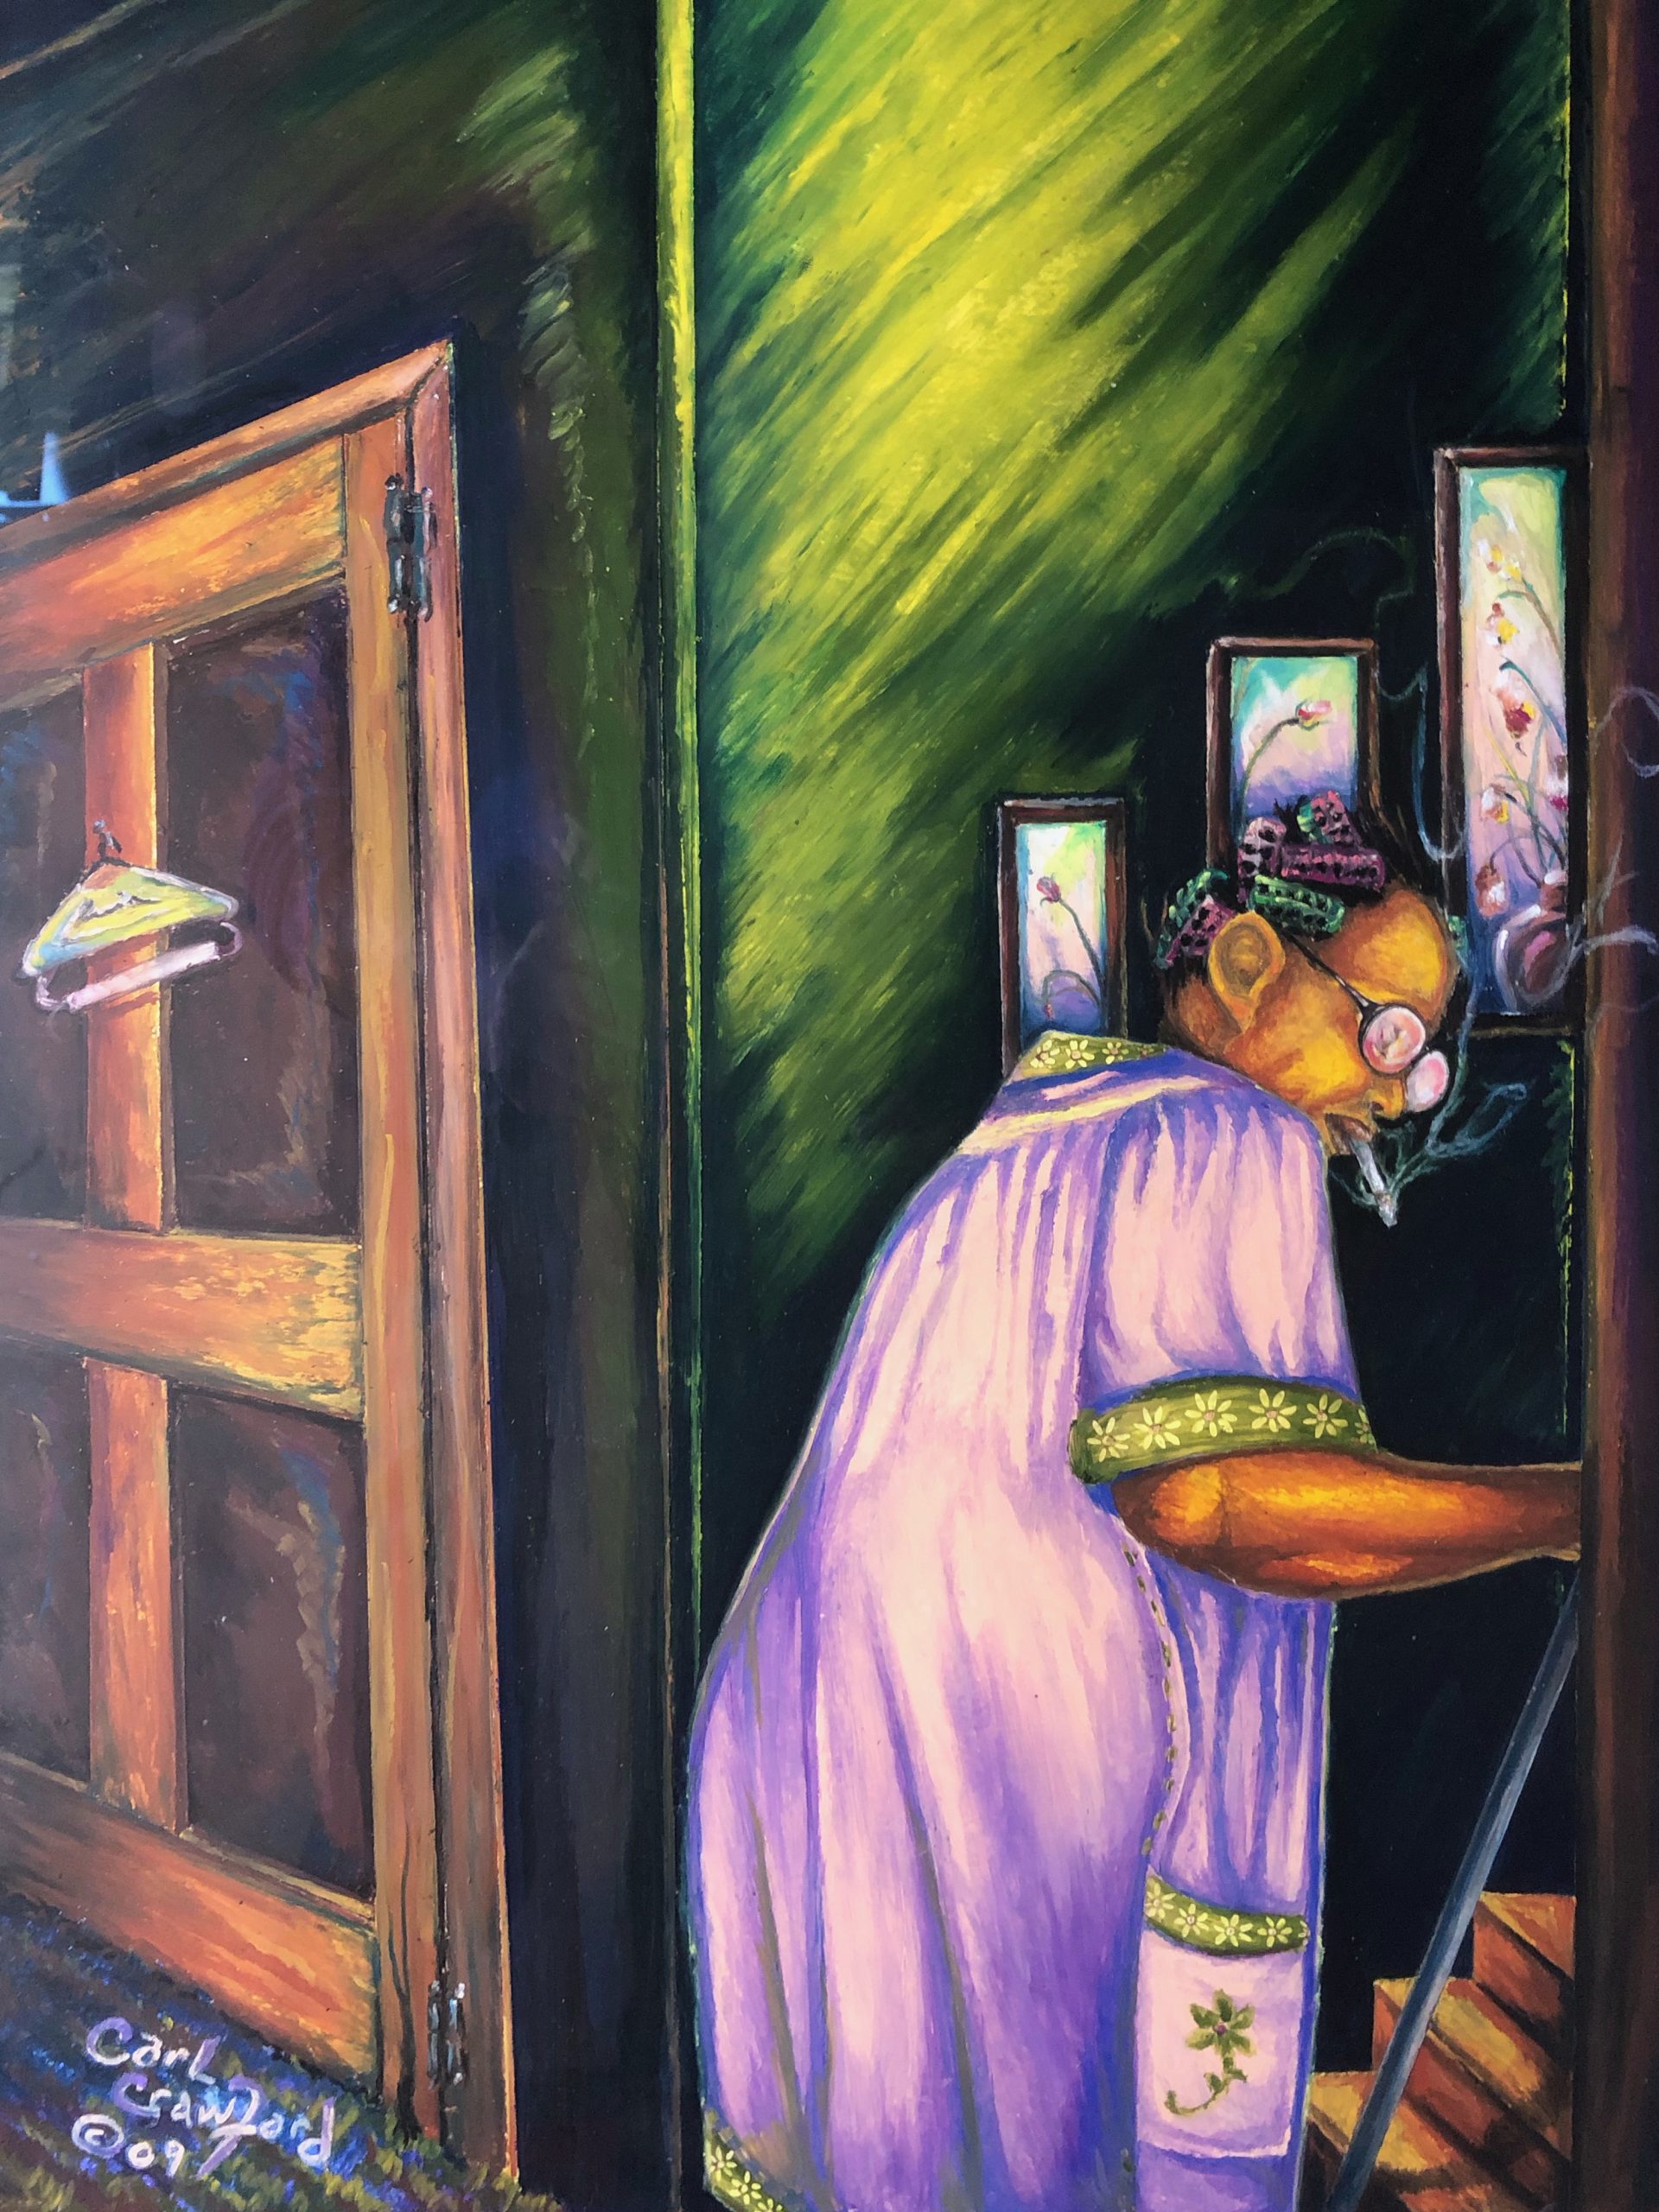 After Carl spent a year in the foster care system as a child, his grandmother, “Big Mama,” brought him into her care and has since remained his rock and arguably the most recognizable and prominent figure to appear in his artwork. Although not done in collage, the “Big Mama” collection of oil pastels is Carl’s foundation.